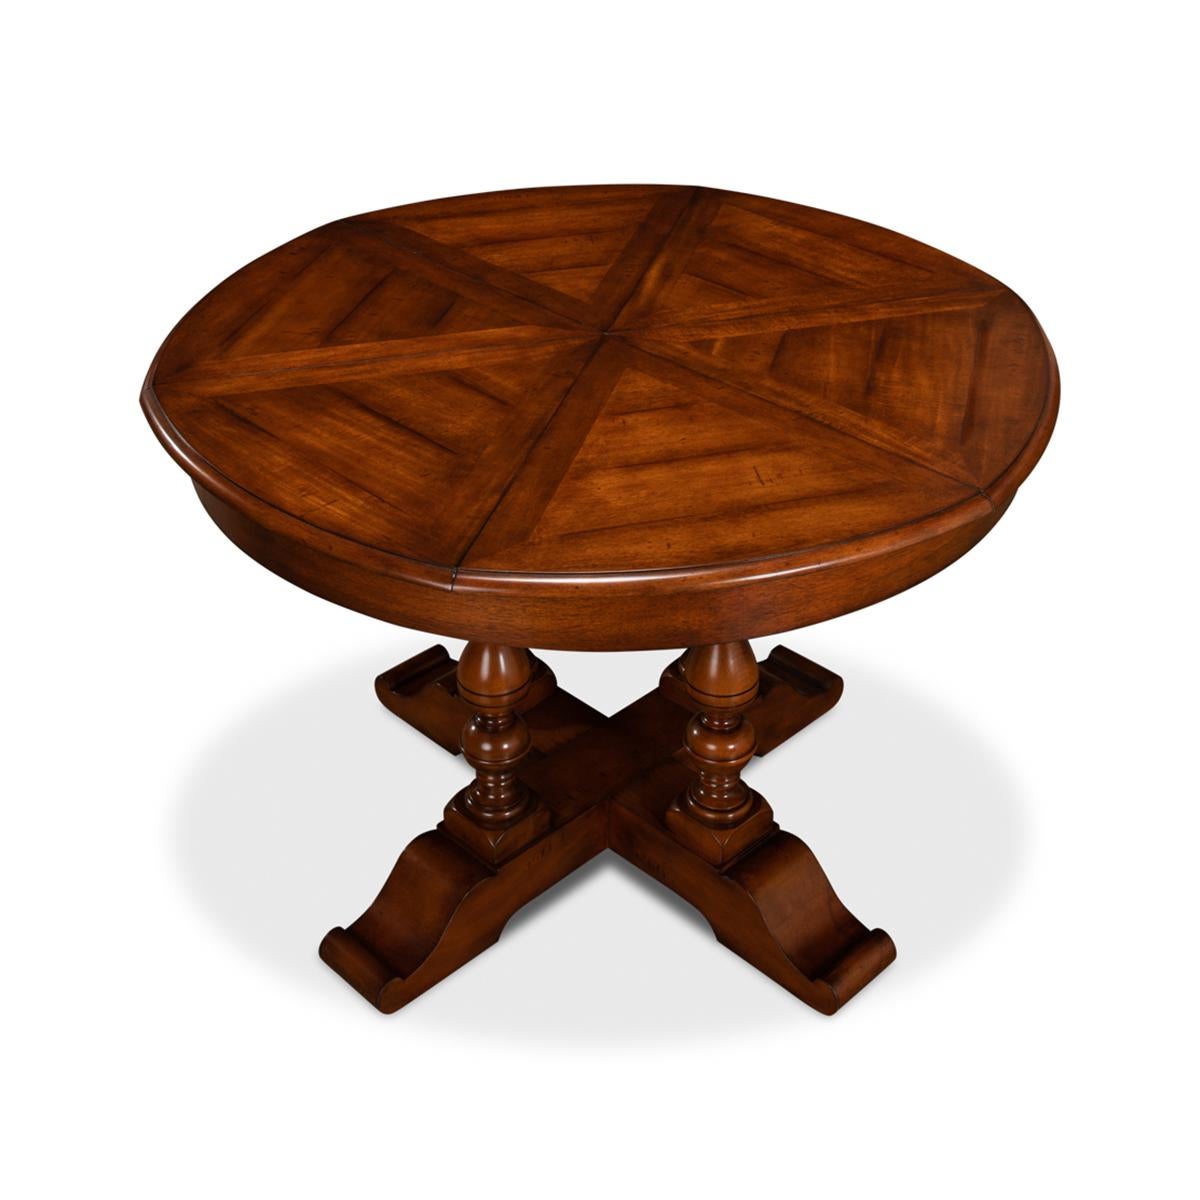 Contemporary Early English Style Round Extension Dining Table For Sale